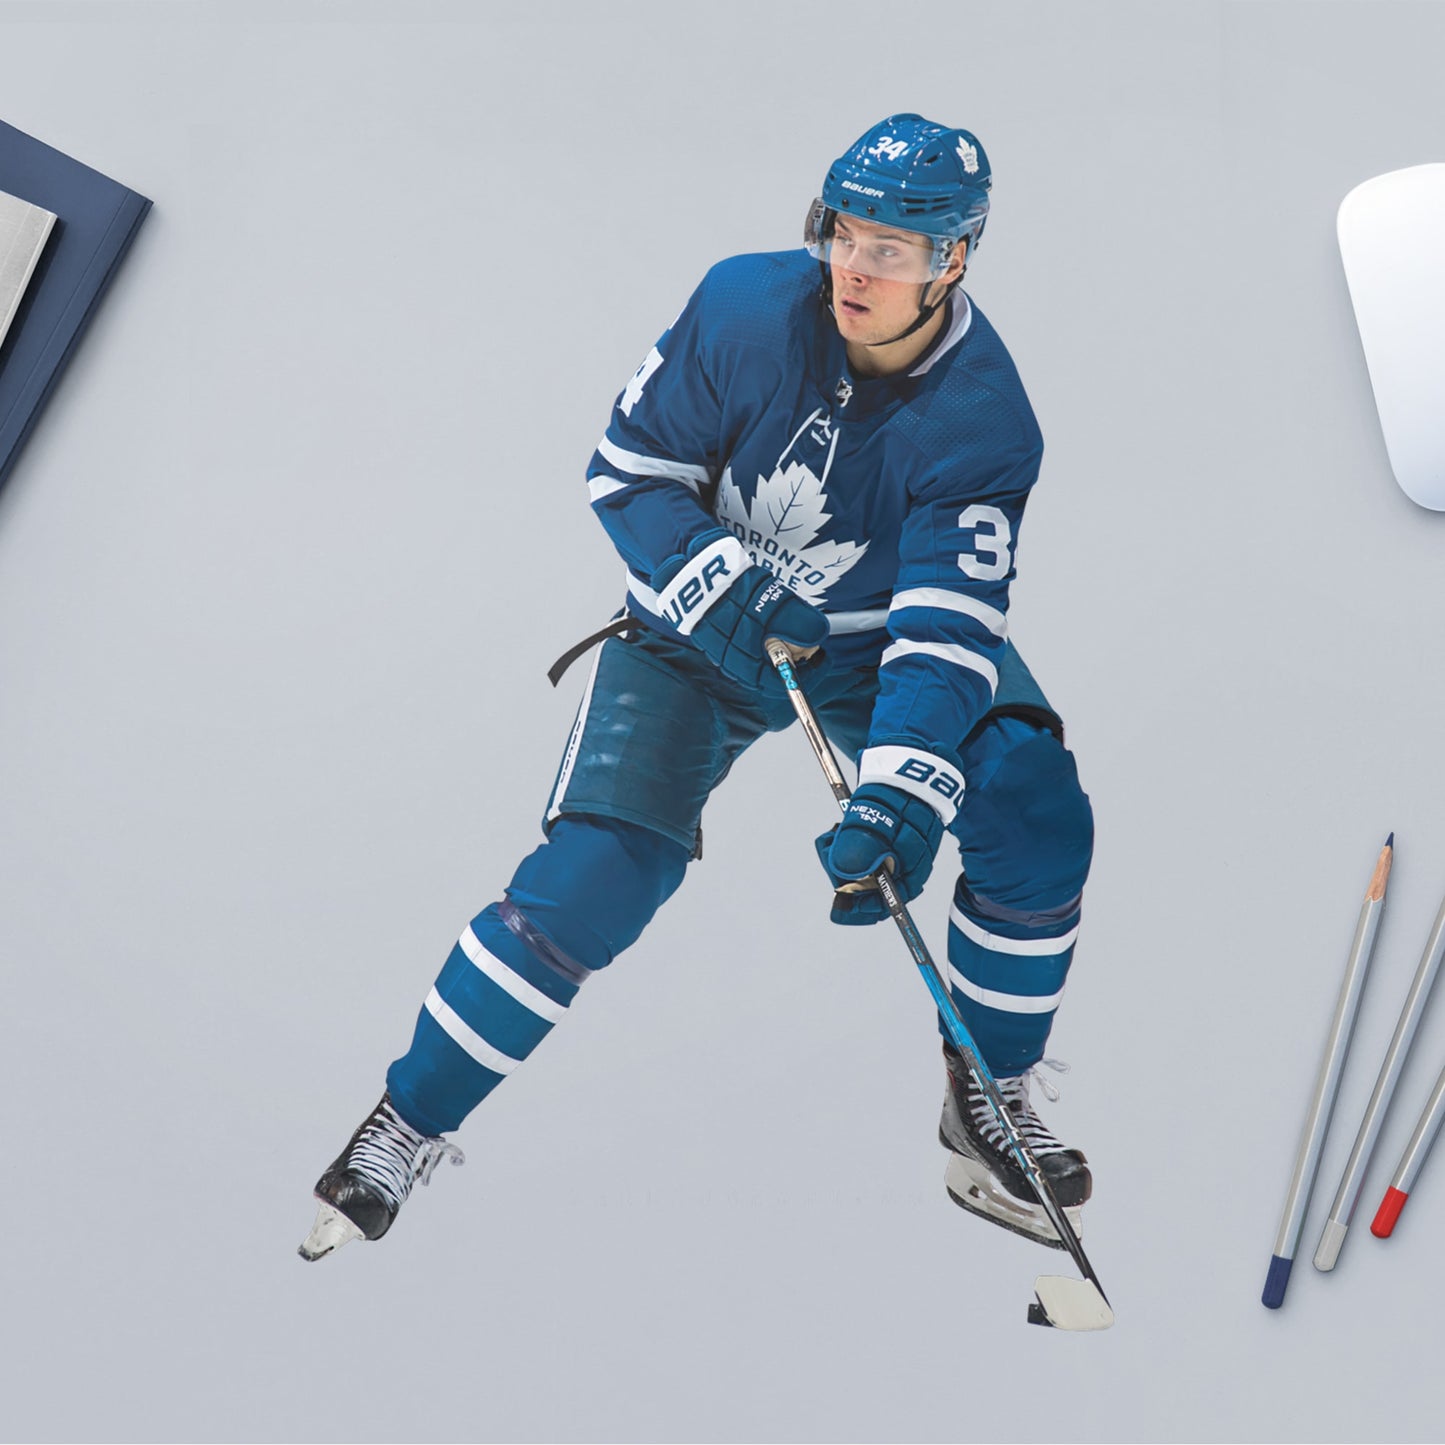 Toronto fans know that the opposing team should be scared when Auston Matthews hits the ice, and now you can bring that action to life in your own home with this Officially Licensed NHL Removable Wall Decal! Seen here in the Toronto home uniform, this removable and reusable decal of Matthews is bold and durable, making it the perfect addition to your bedroom, office, or fan room. Go Maple Leafs!